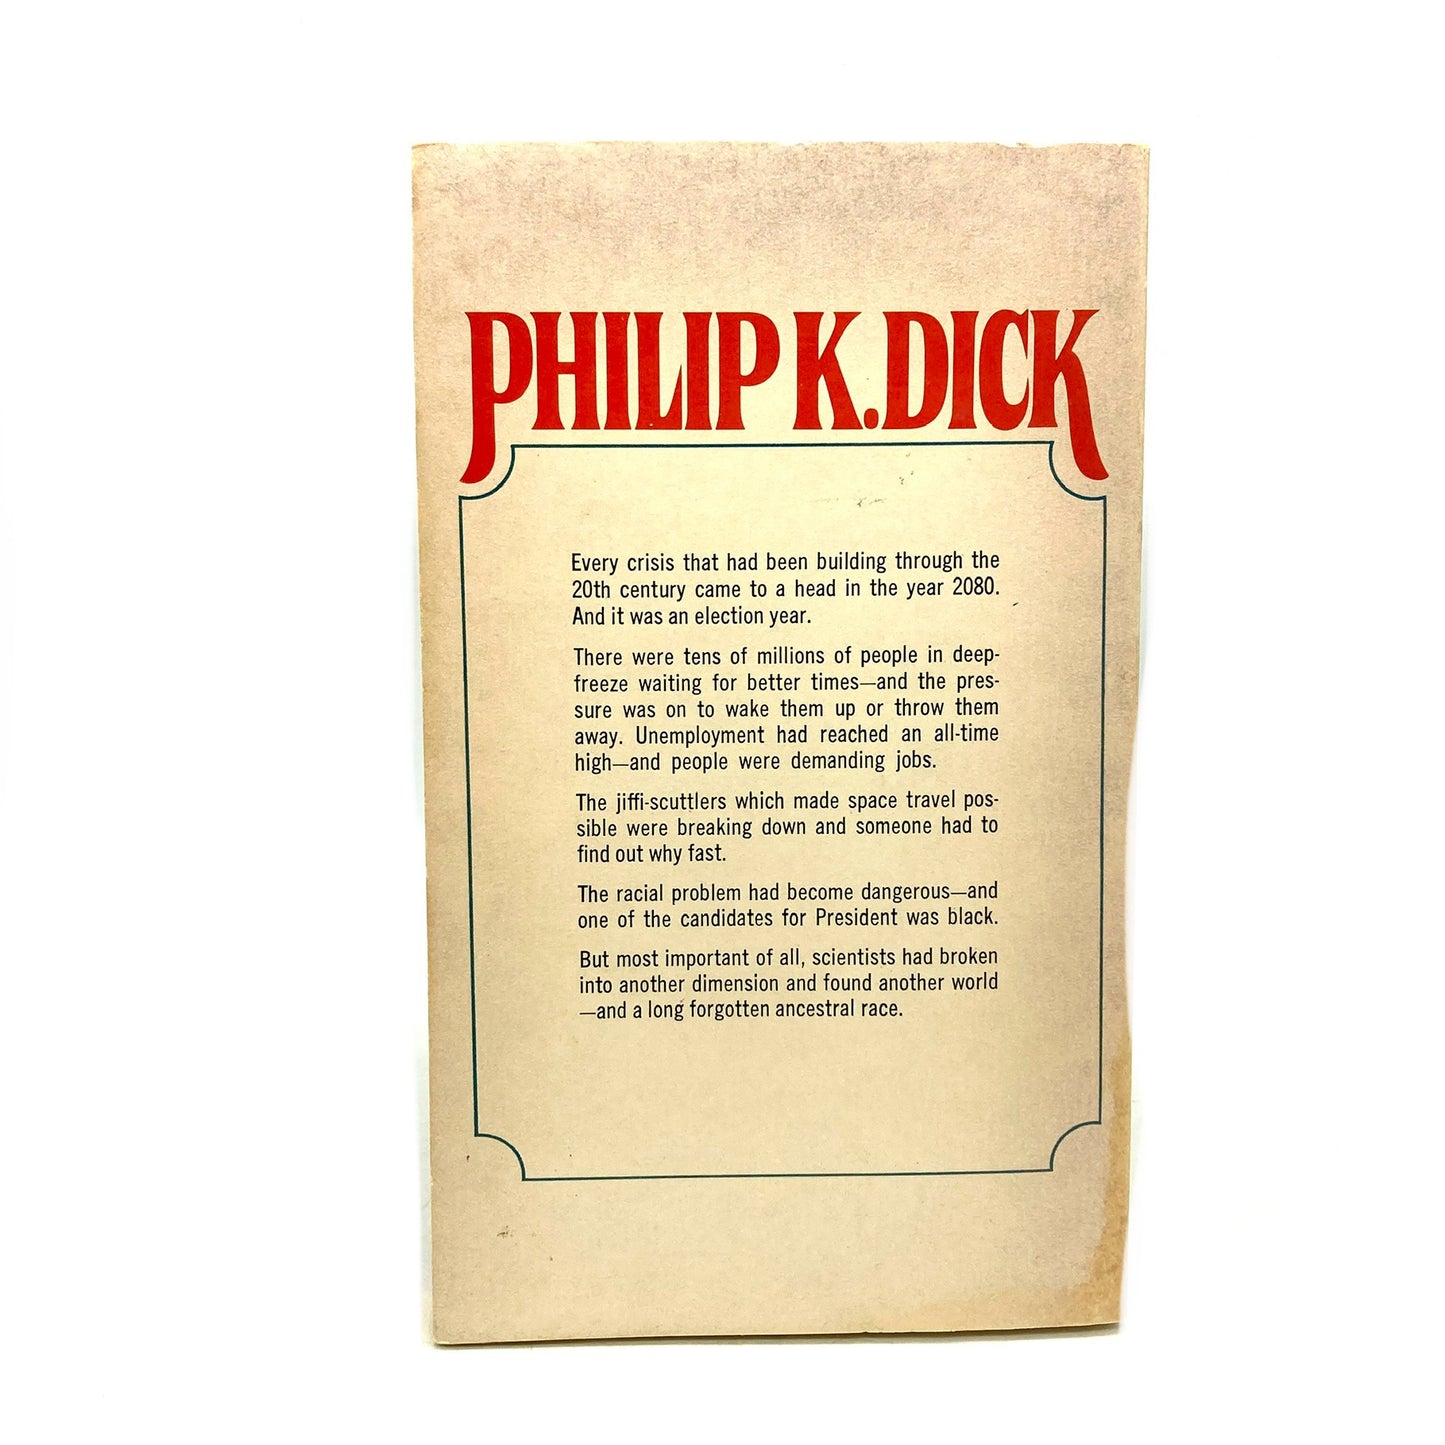 DICK, Philip K. "The Crack in Space" [Ace, 1966]